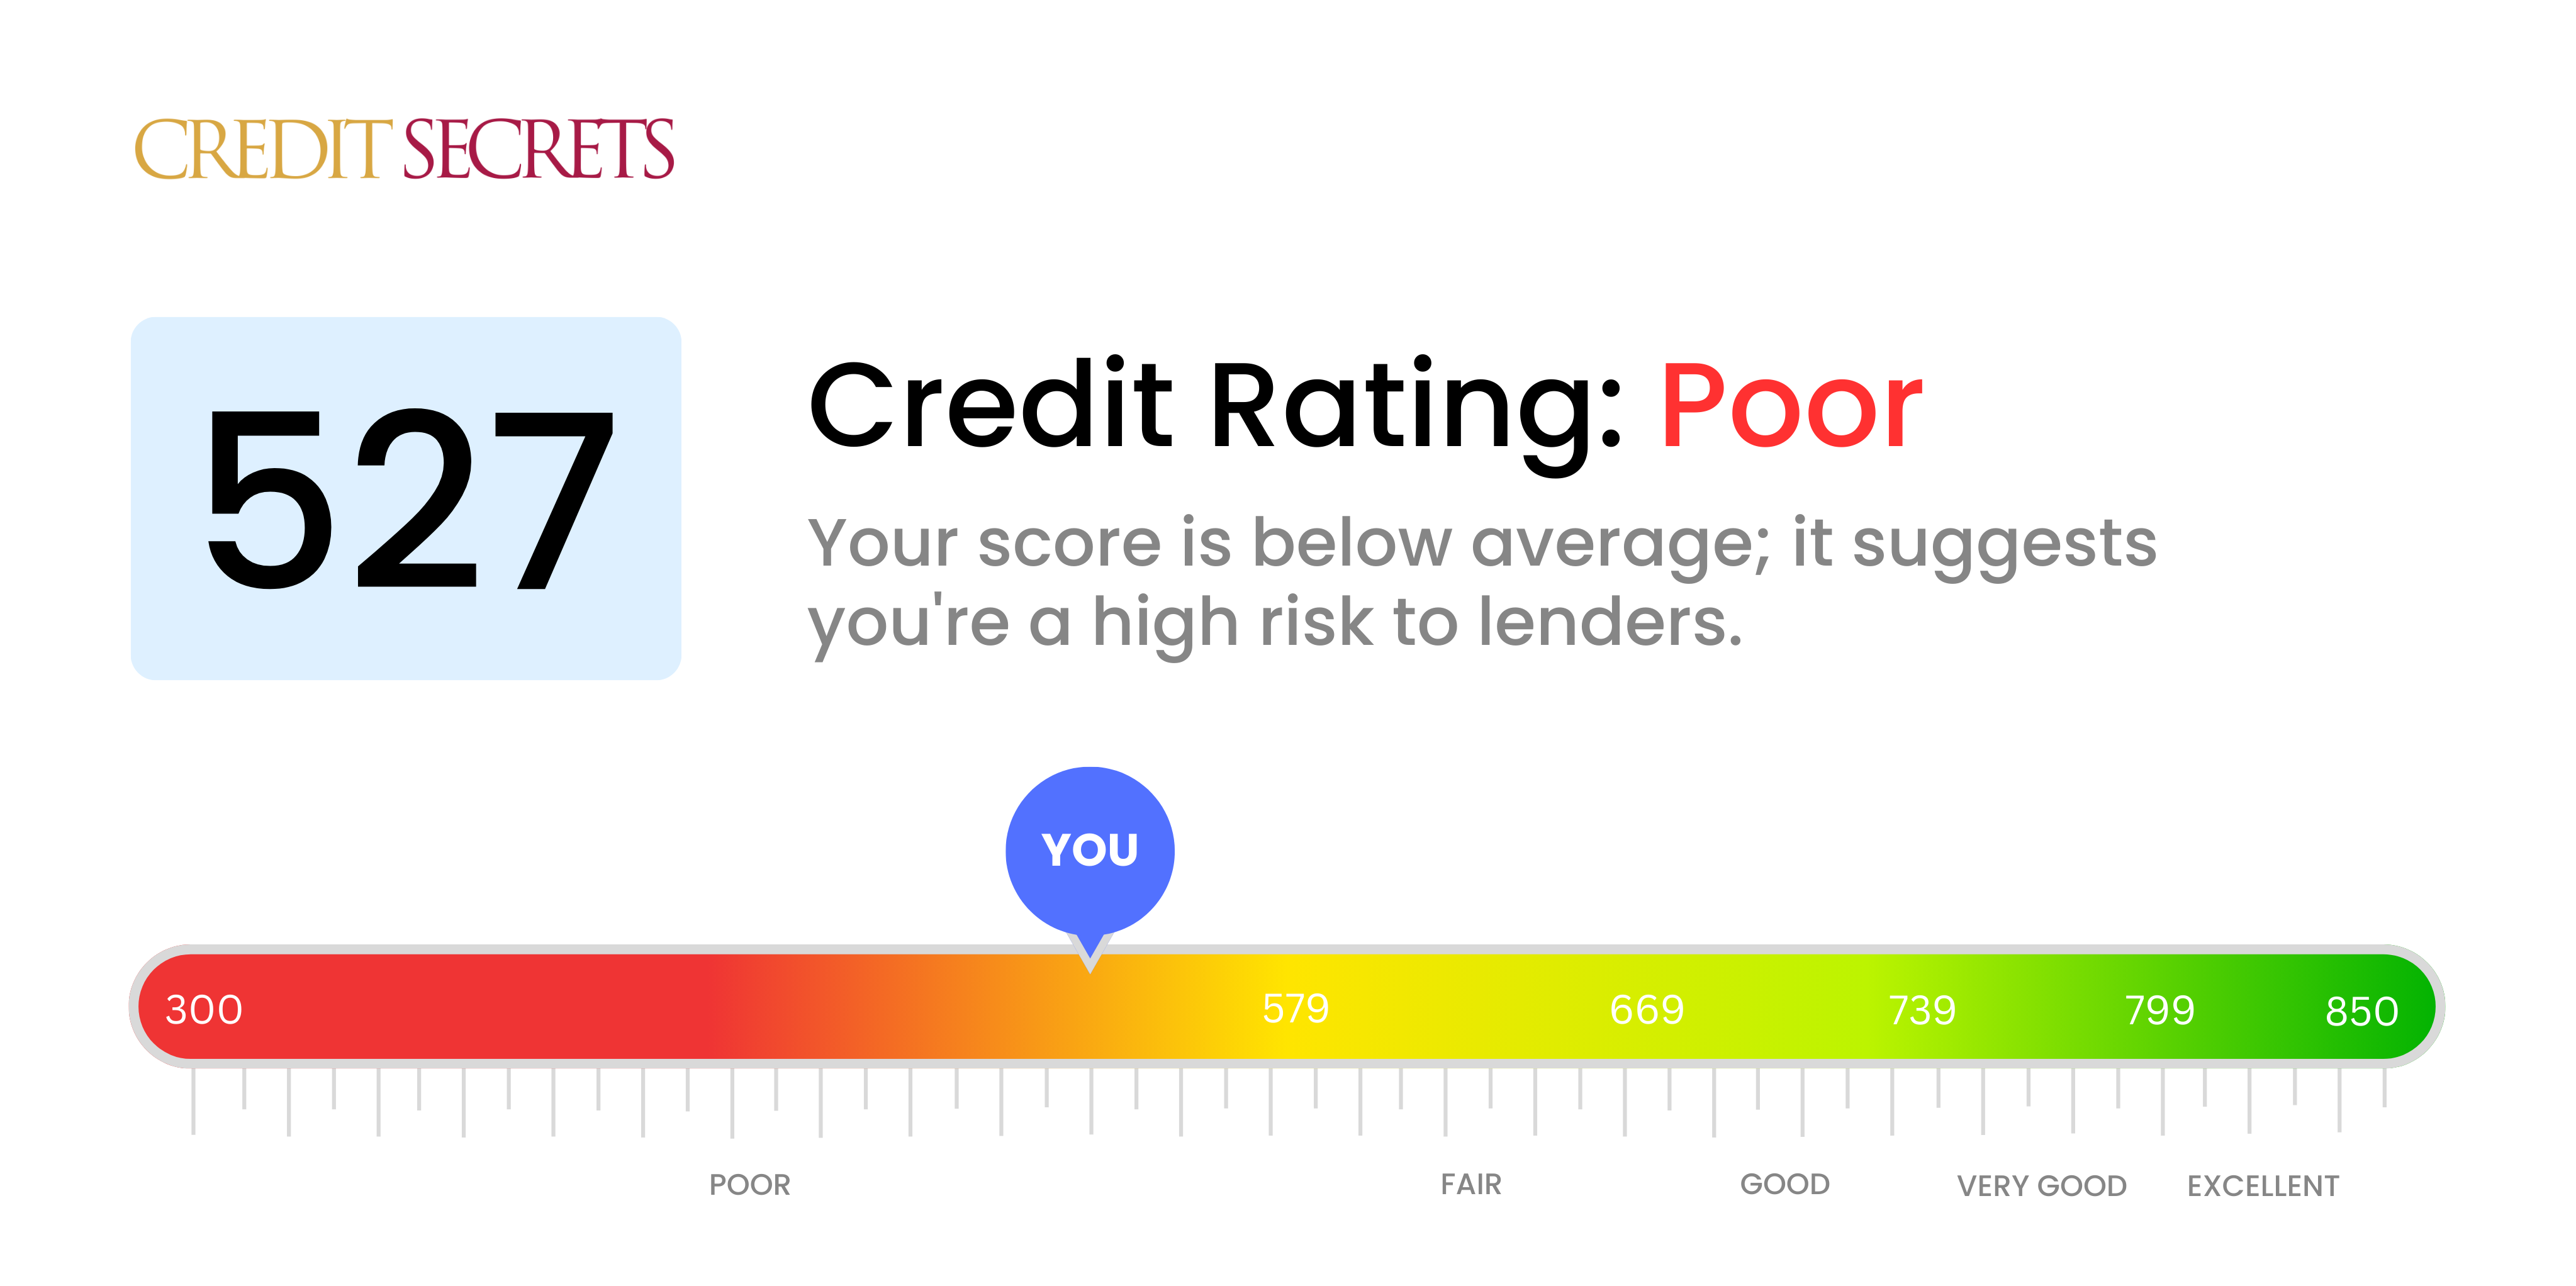 Is 527 a good credit score?